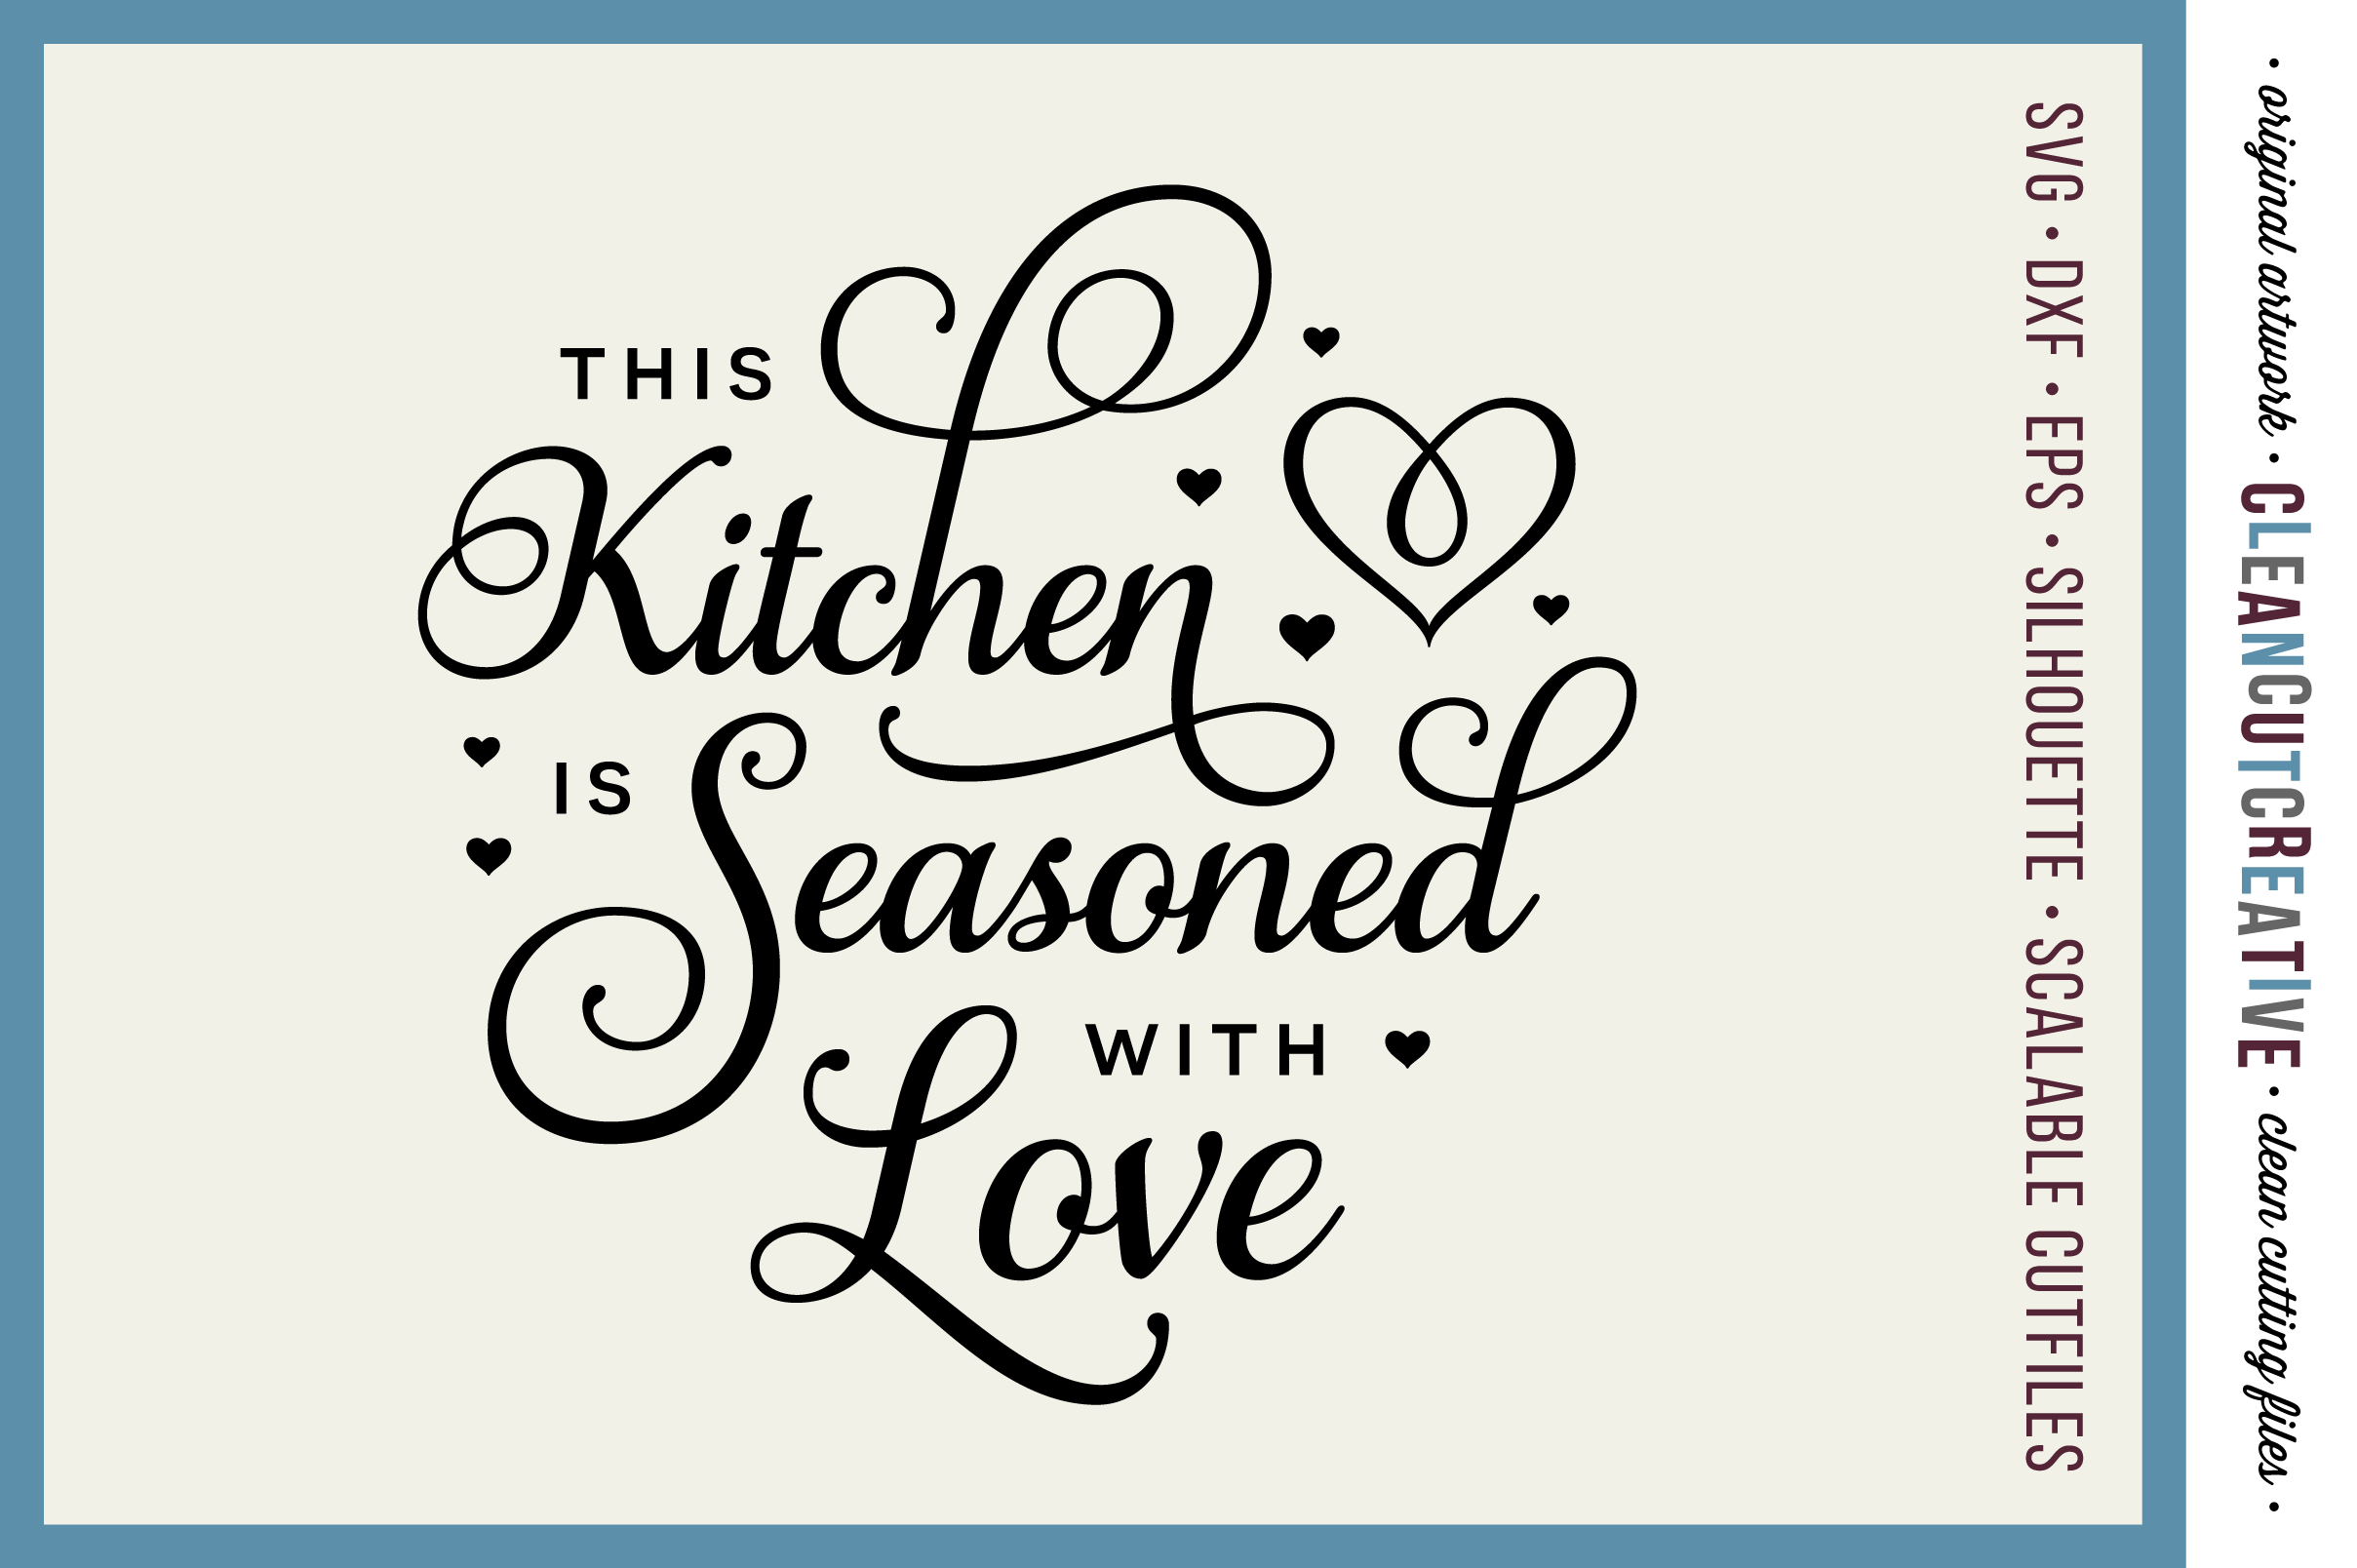 Download This Kitchen is Seasoned with Love - SVG DXF EPS PNG - Cricut & Silhouette - clean cutting files